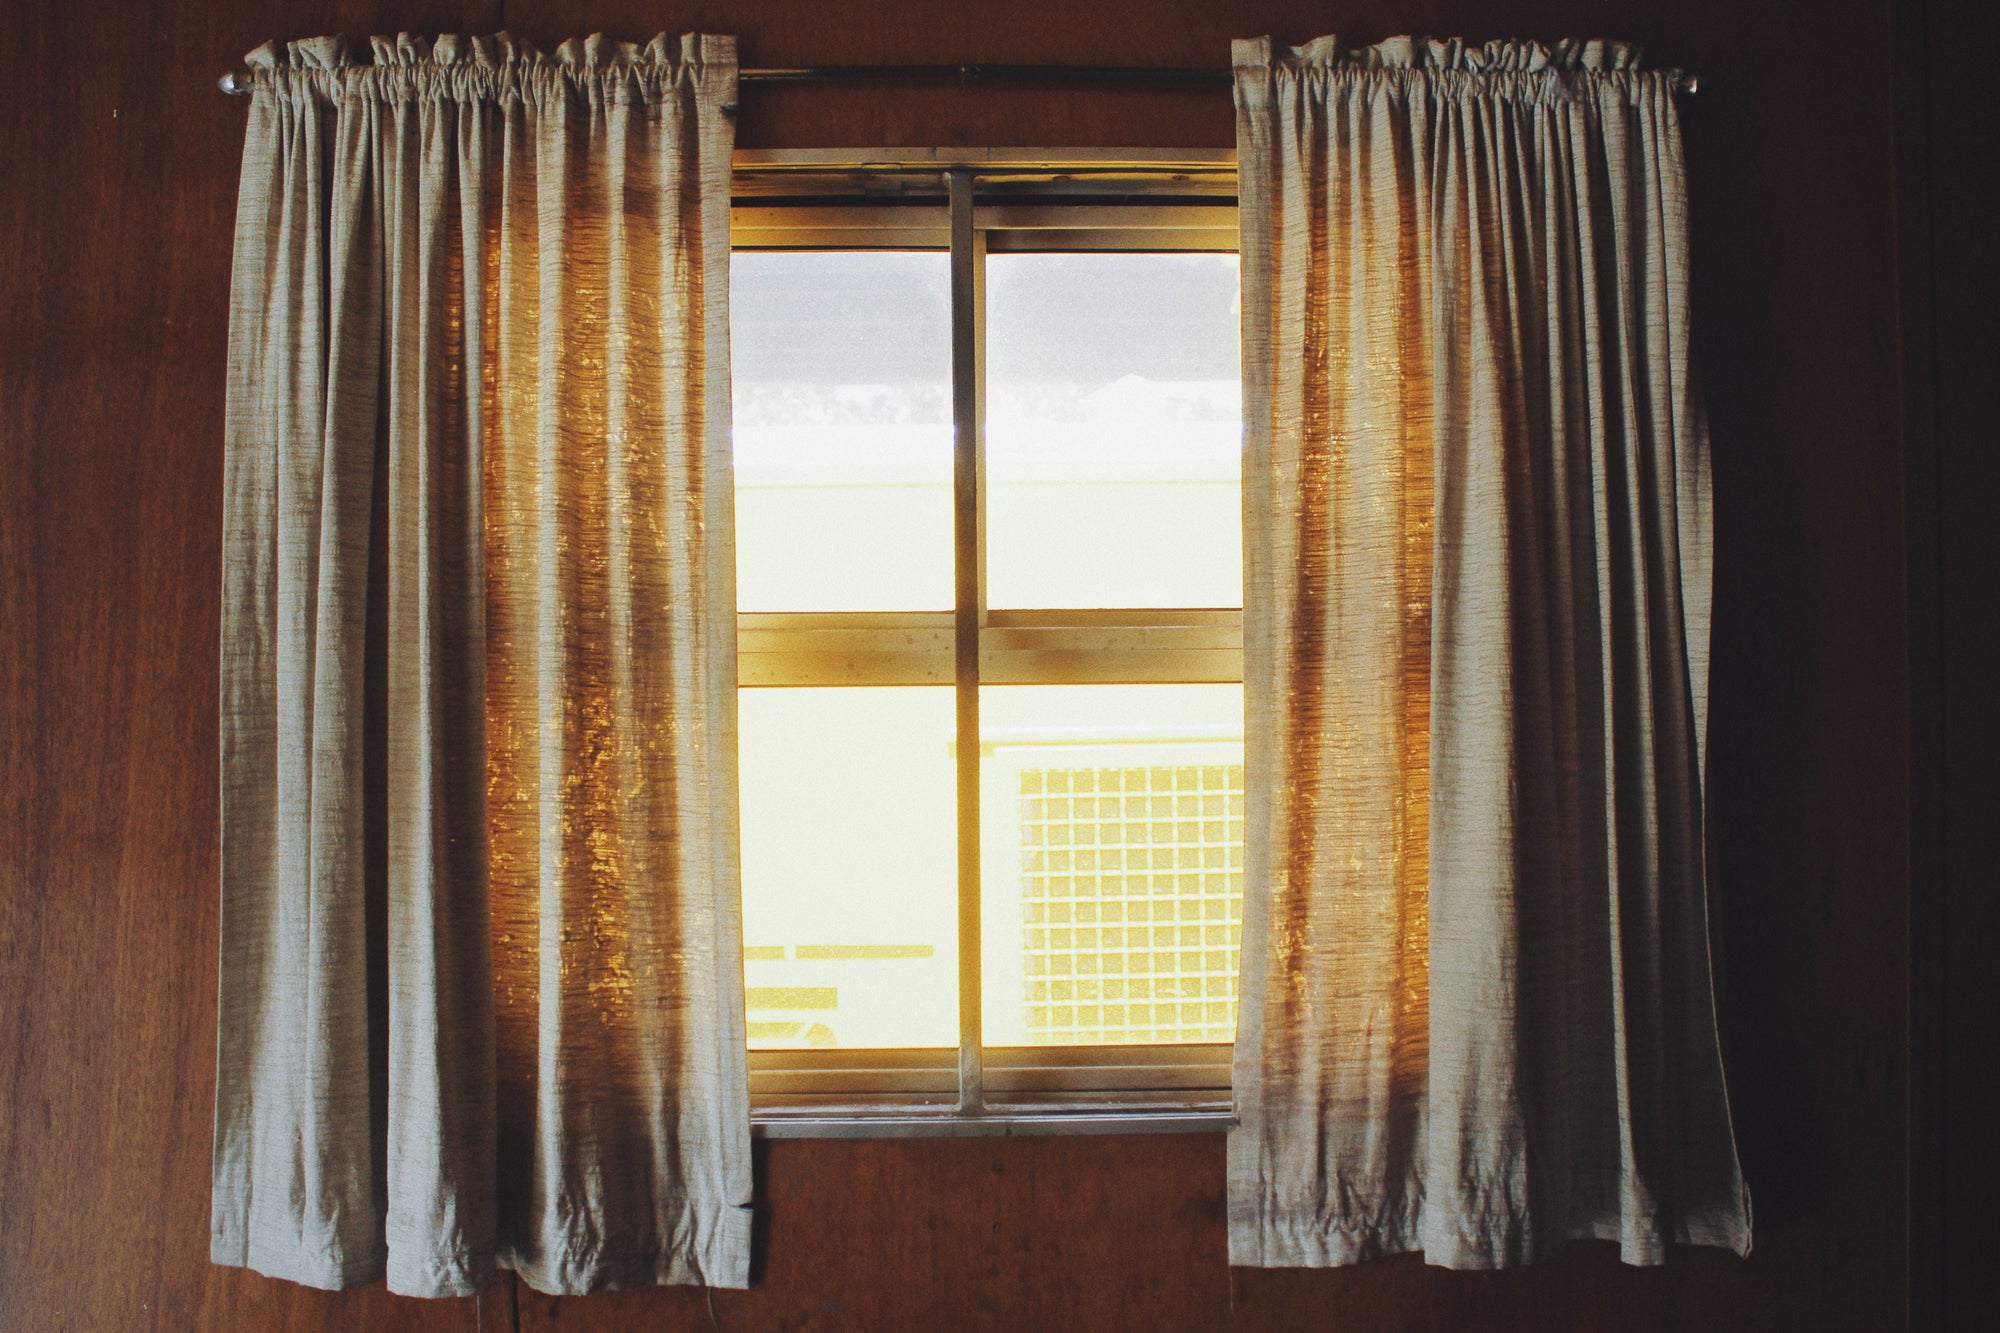 7 Signs It's Time to Replace Your Windows